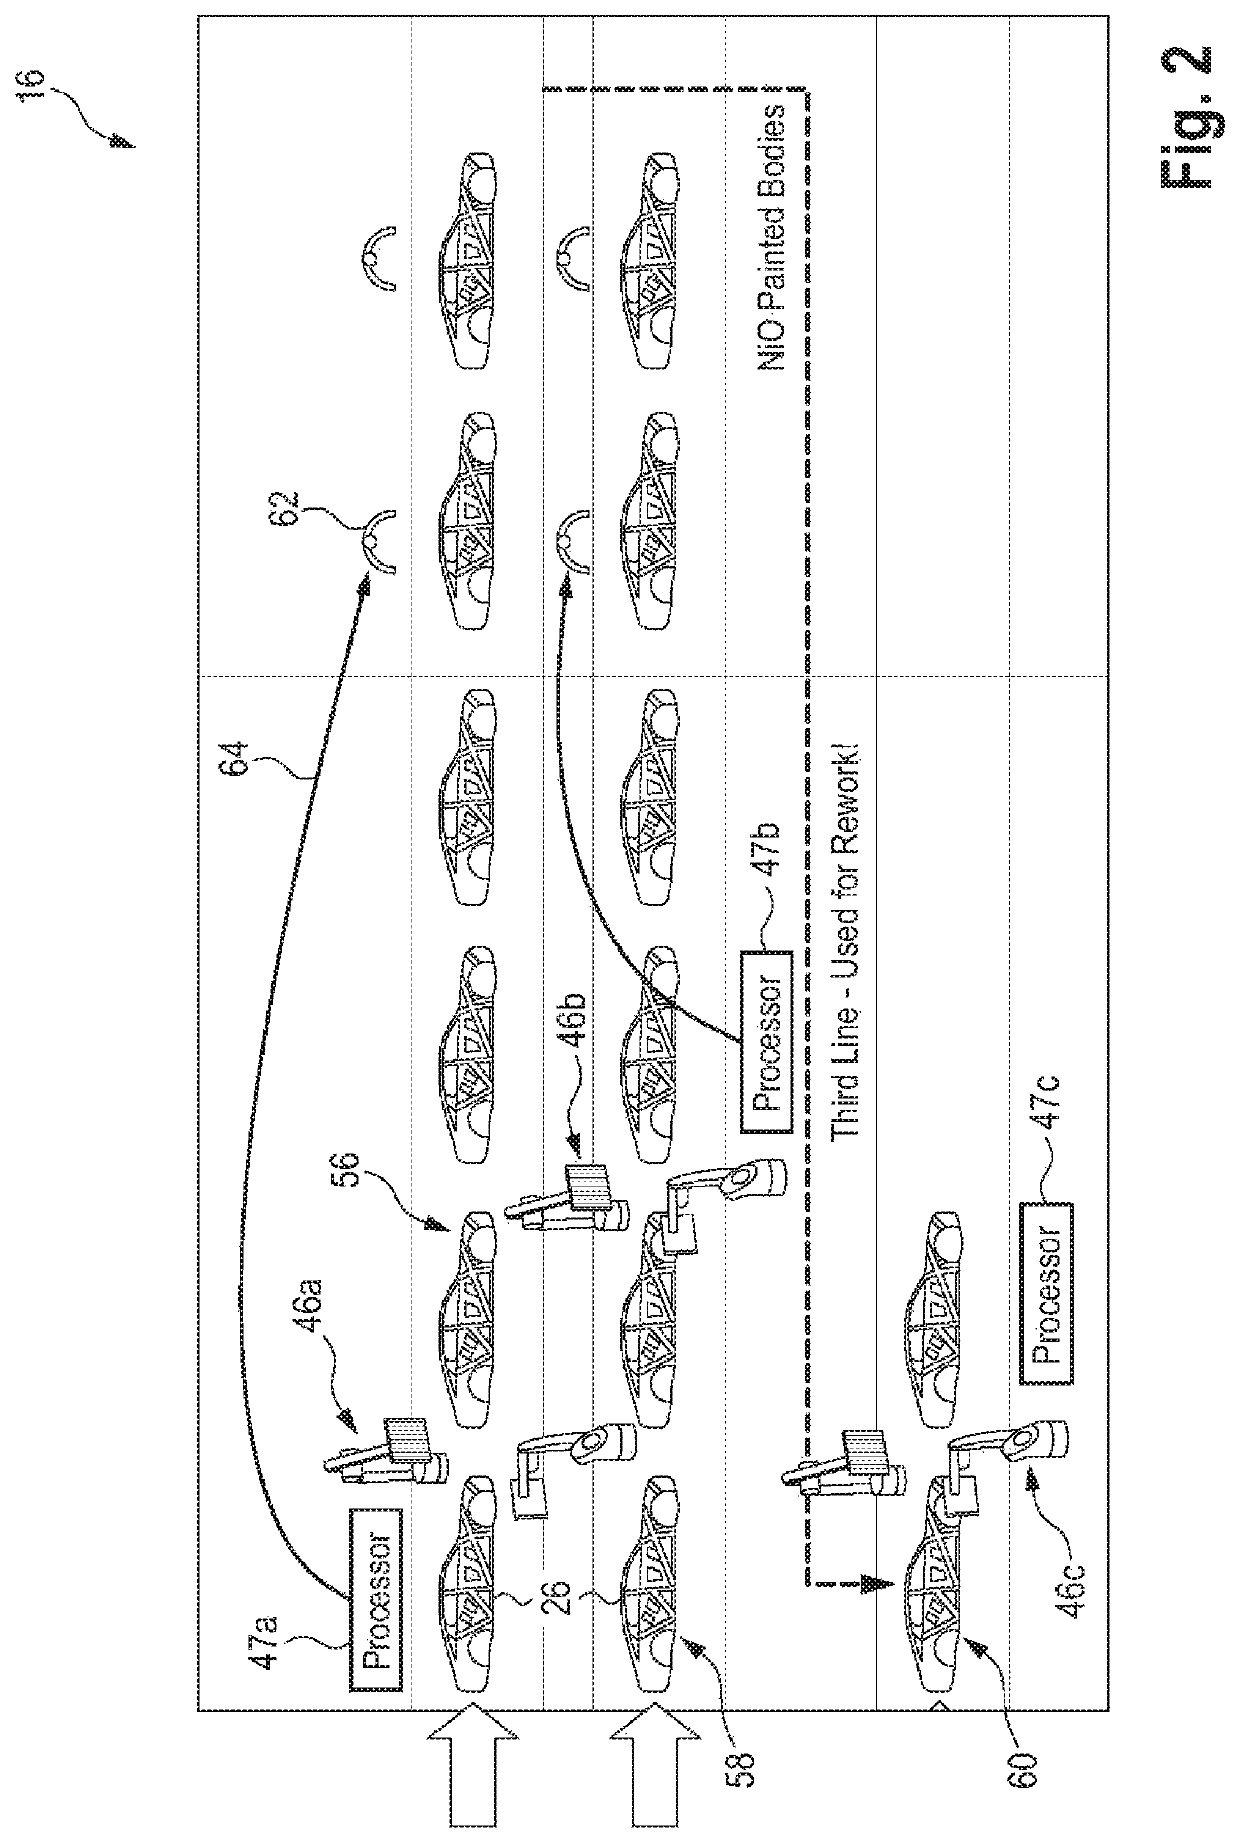 Automobile manufacturing plant and method